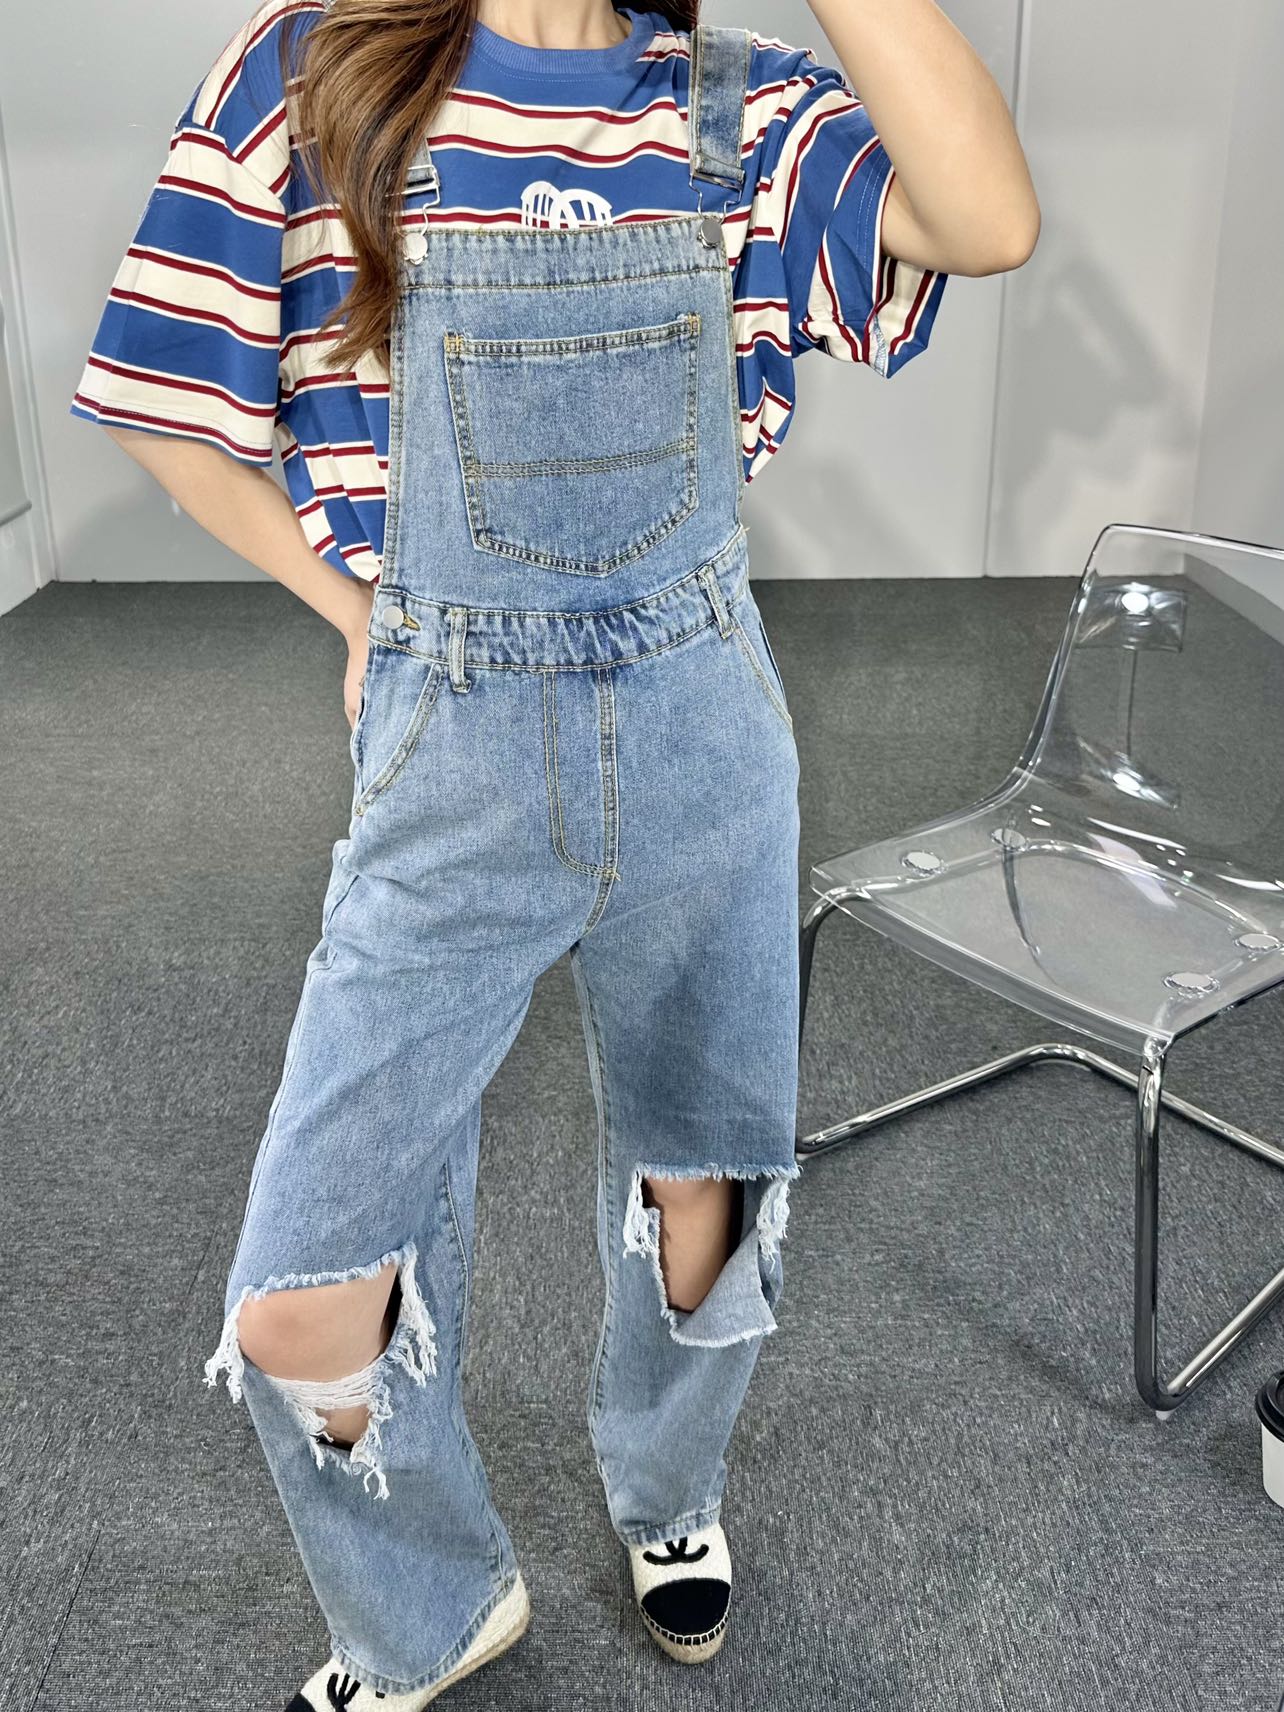 Ripped Denim Jeans Jumpsuit For Women For Women Slim Fit, Casual Fashion  Overalls With Bib, Washed Out Style Streetwear L230926 From Hoodies011,  $8.06 | DHgate.Com